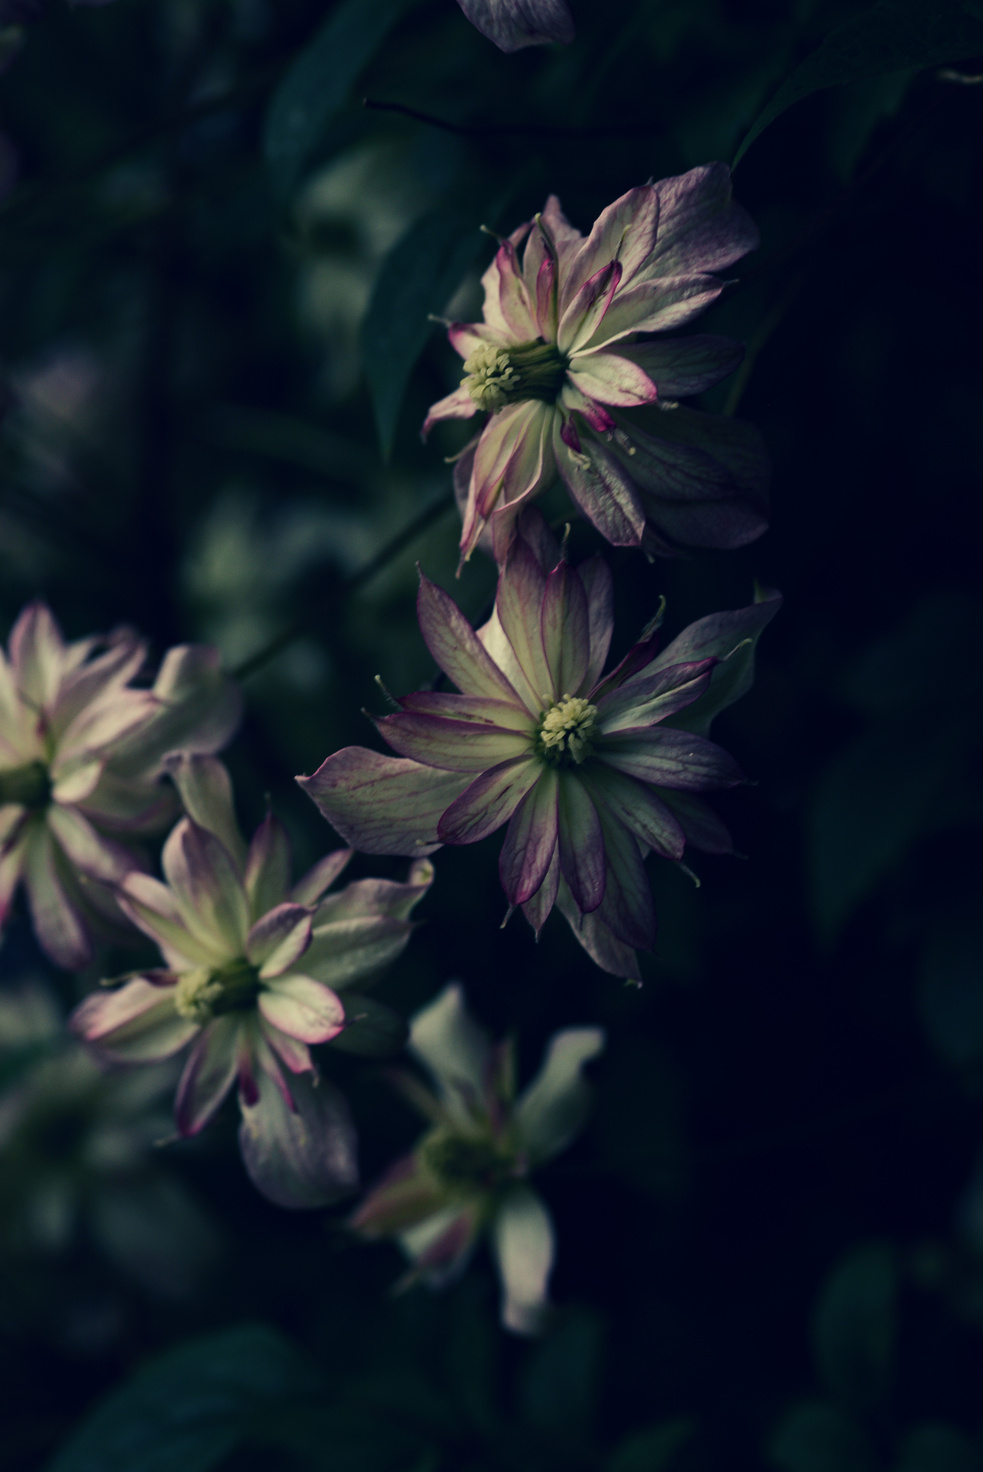 a close up of some clematis flowers in the dark